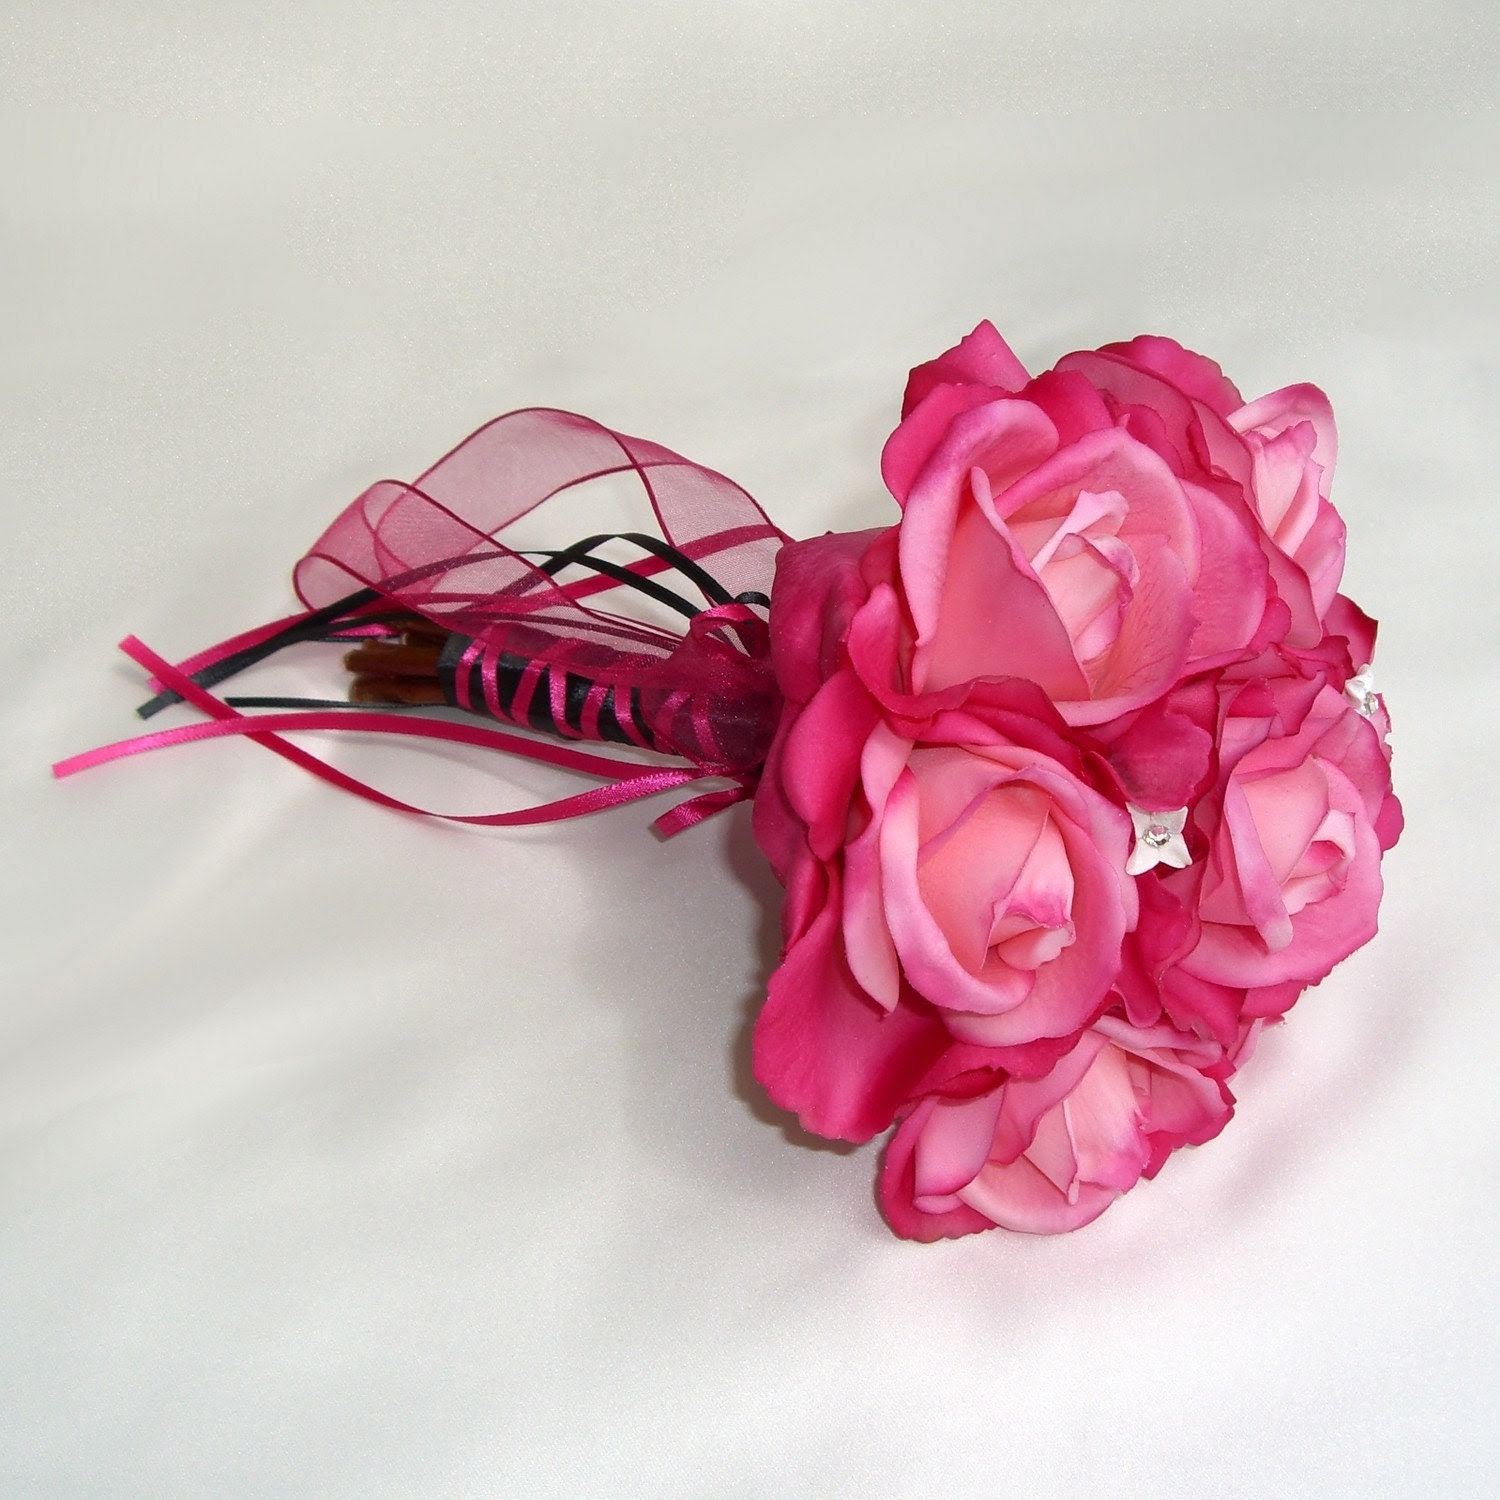 Sparkling Lily Rose Bouquet - Small Size